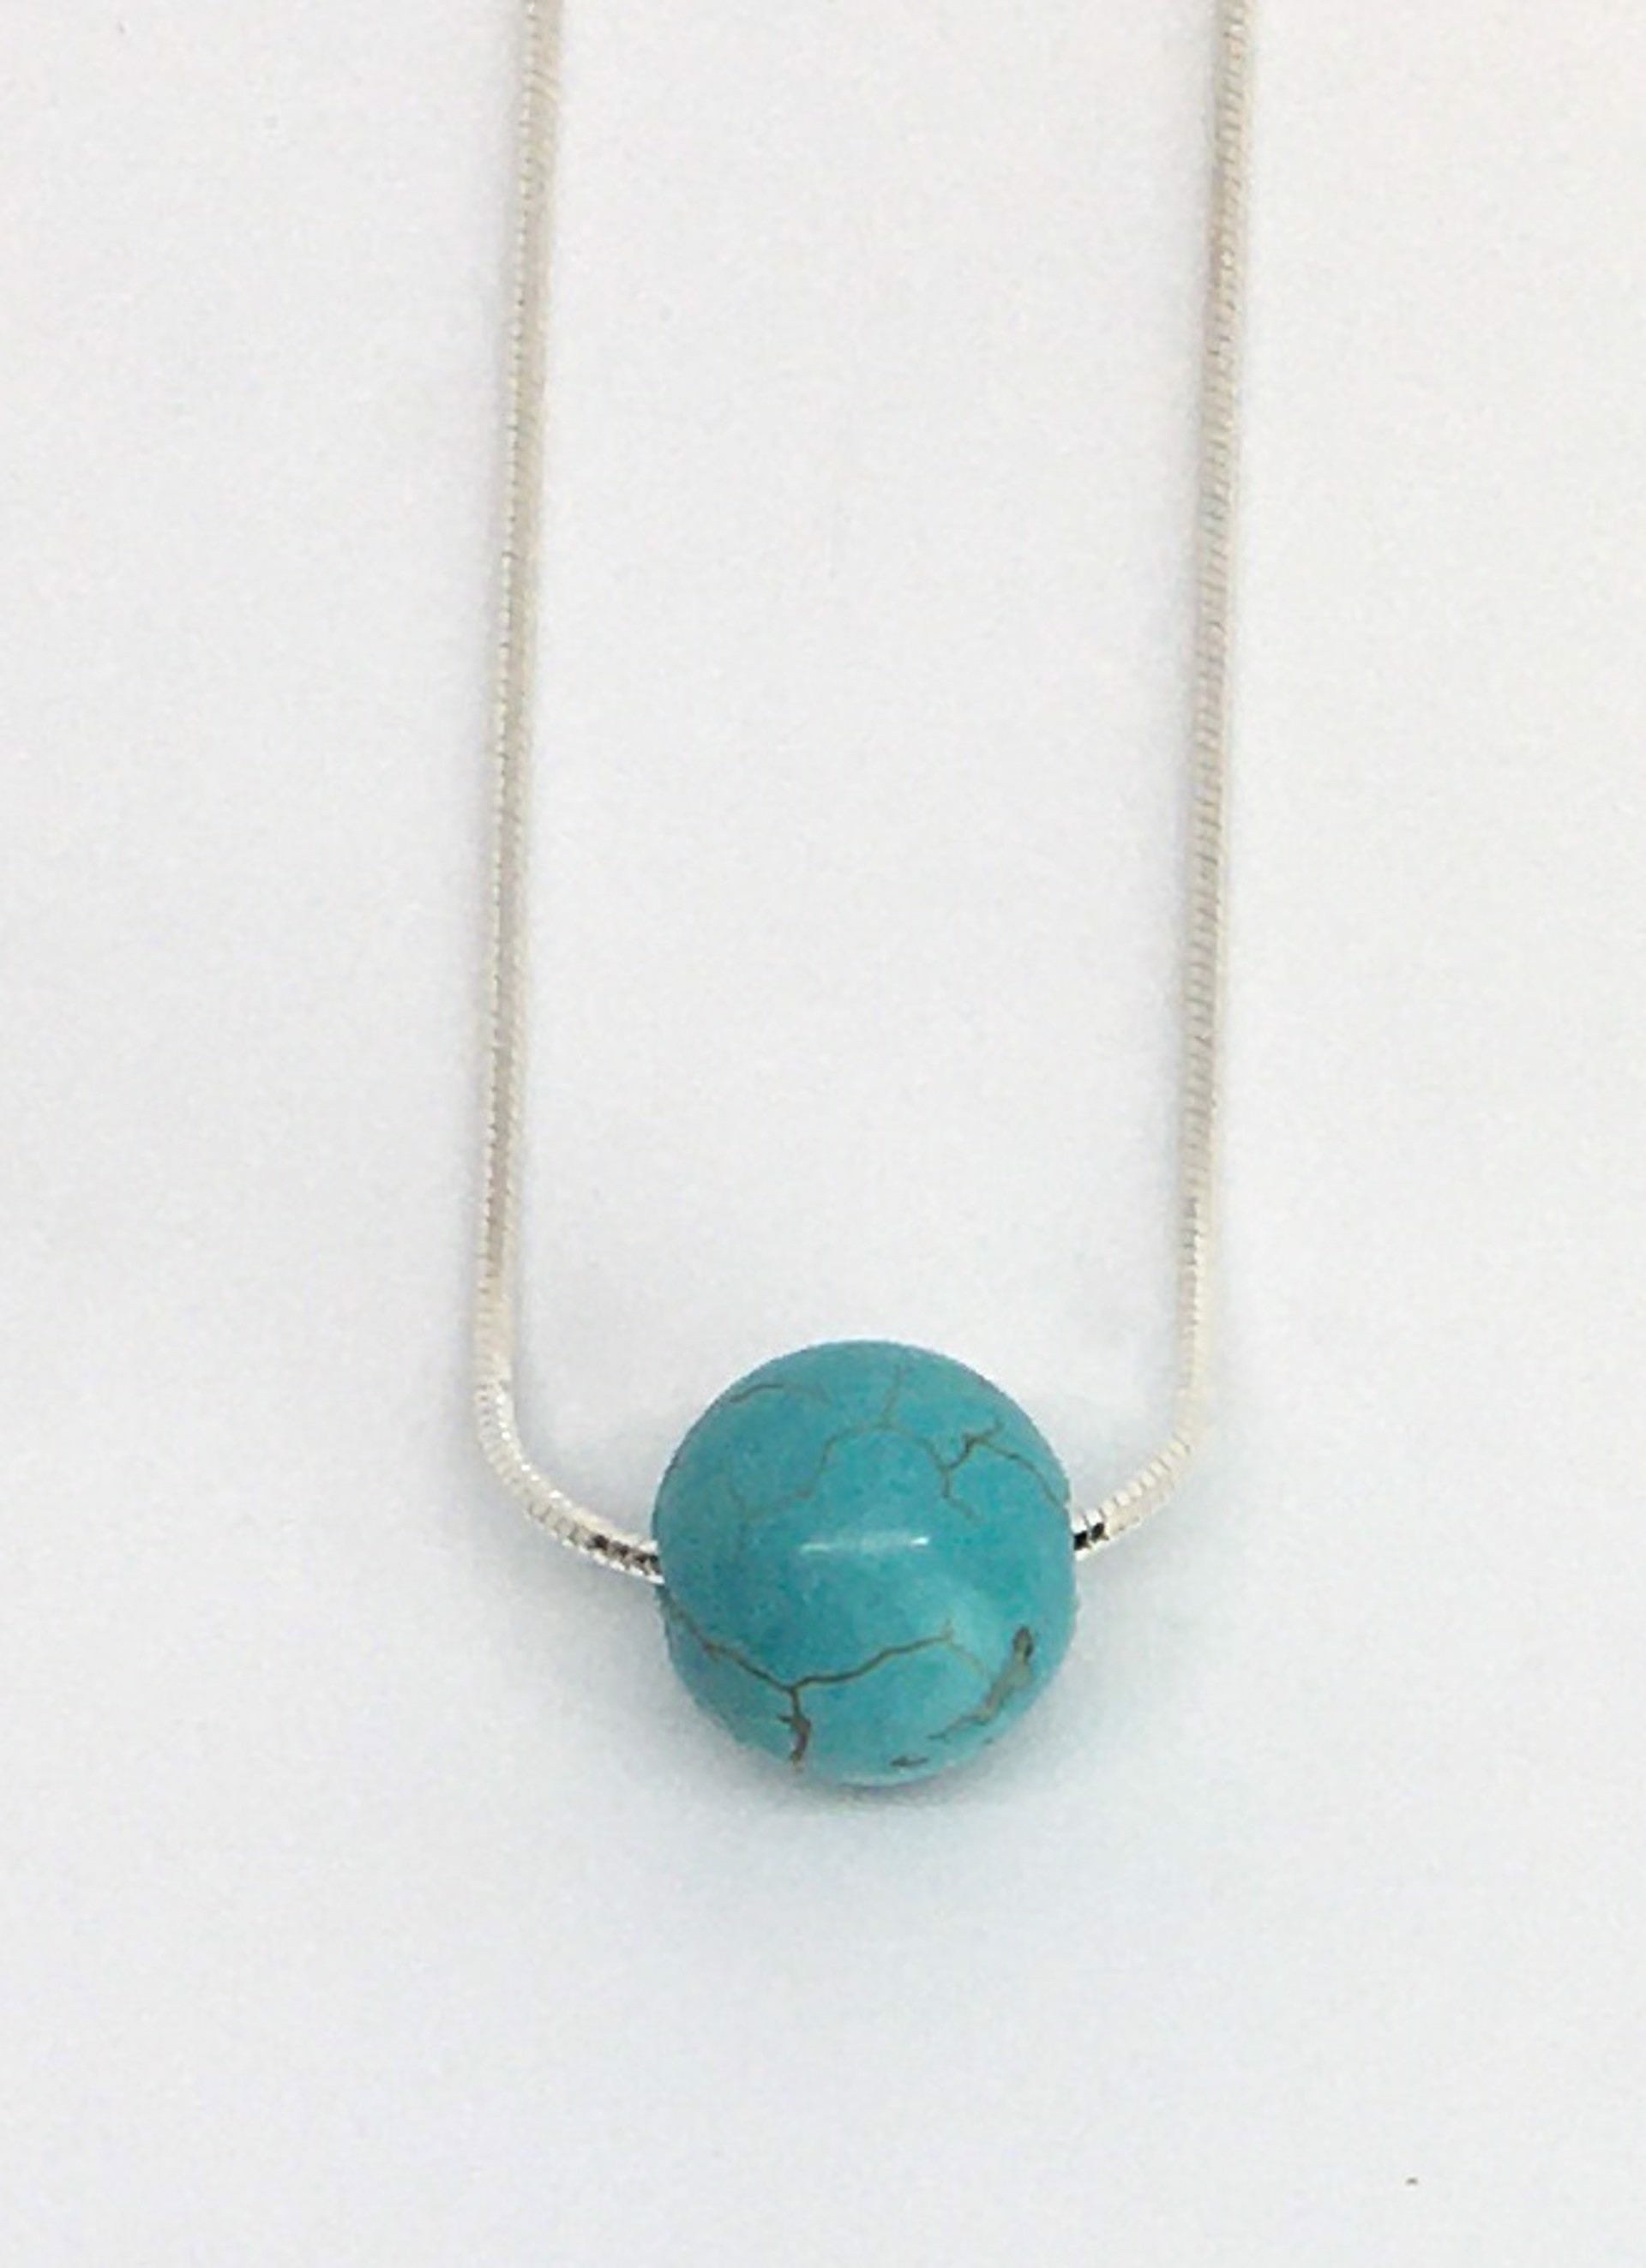 18" Eunity Necklace with Turquoise Bead by Suzanne Woodworth